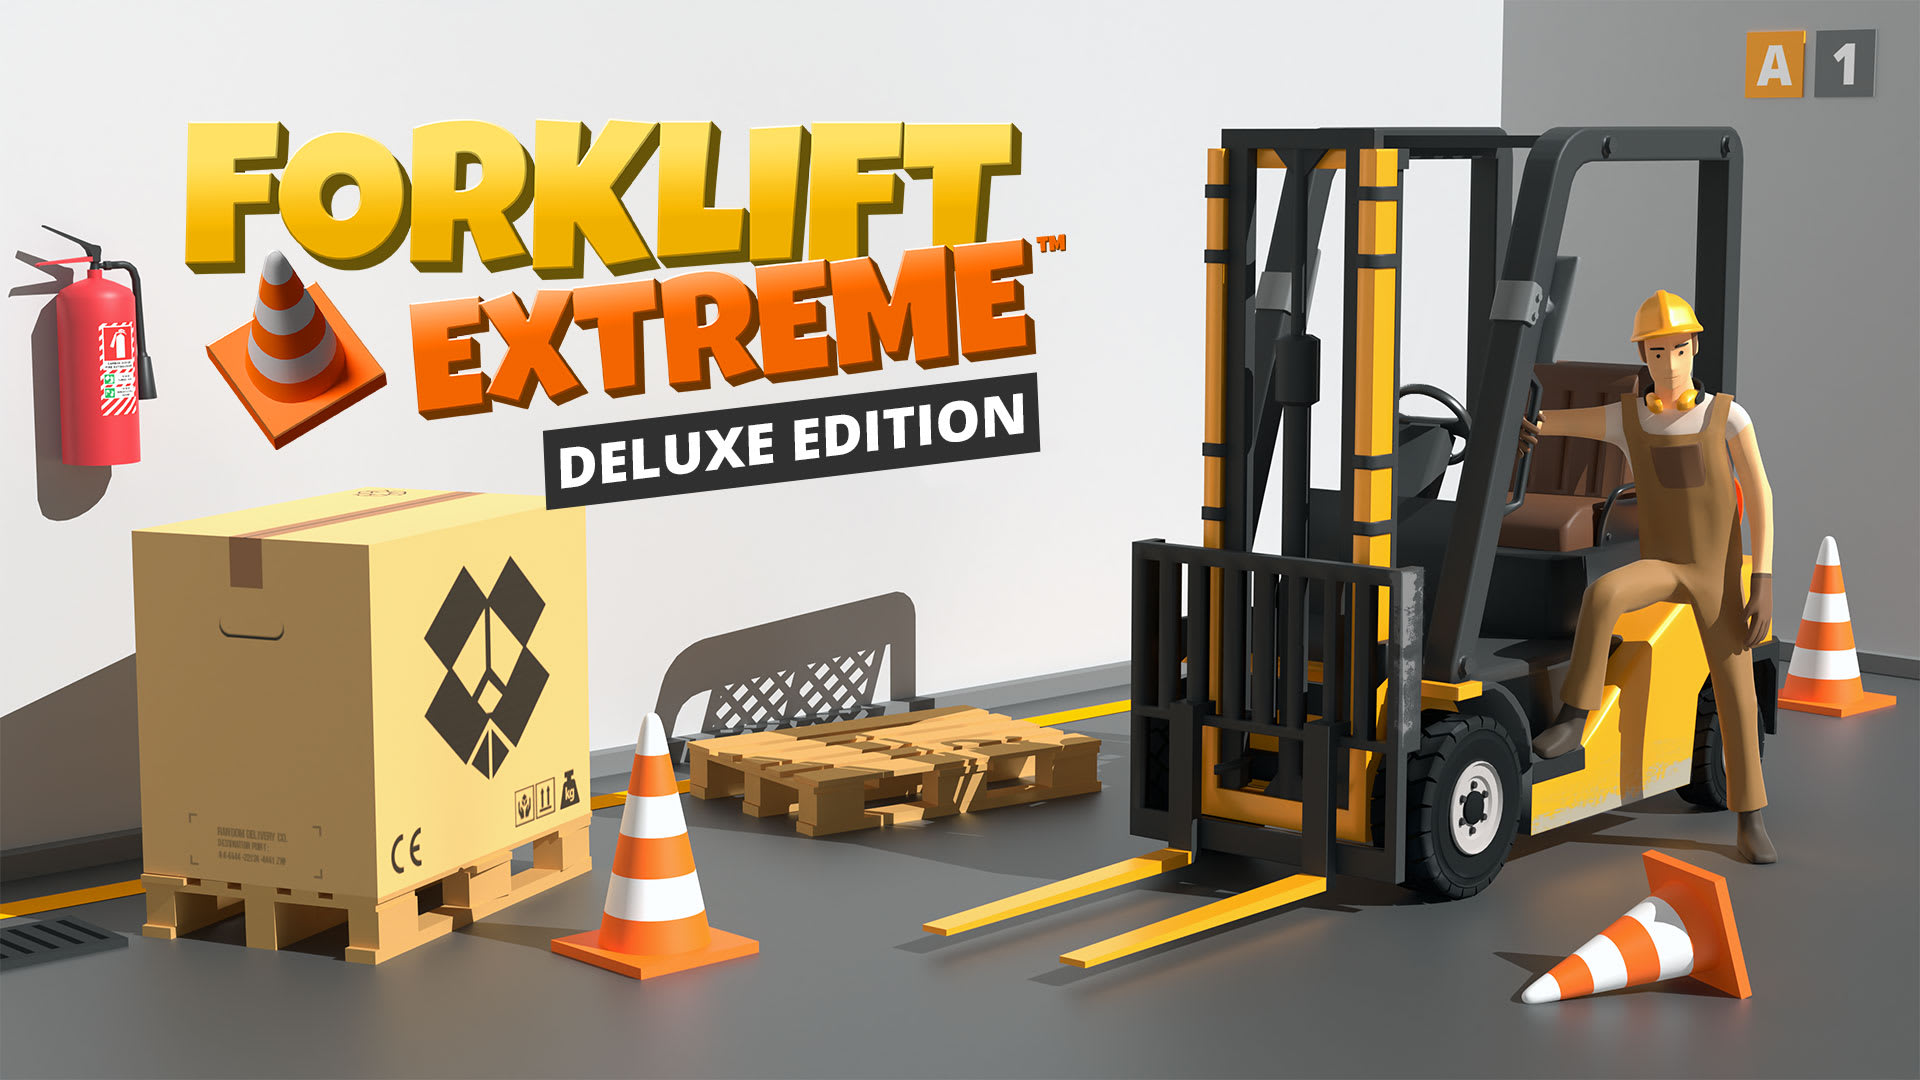 Forklift Extreme Deluxe Edition